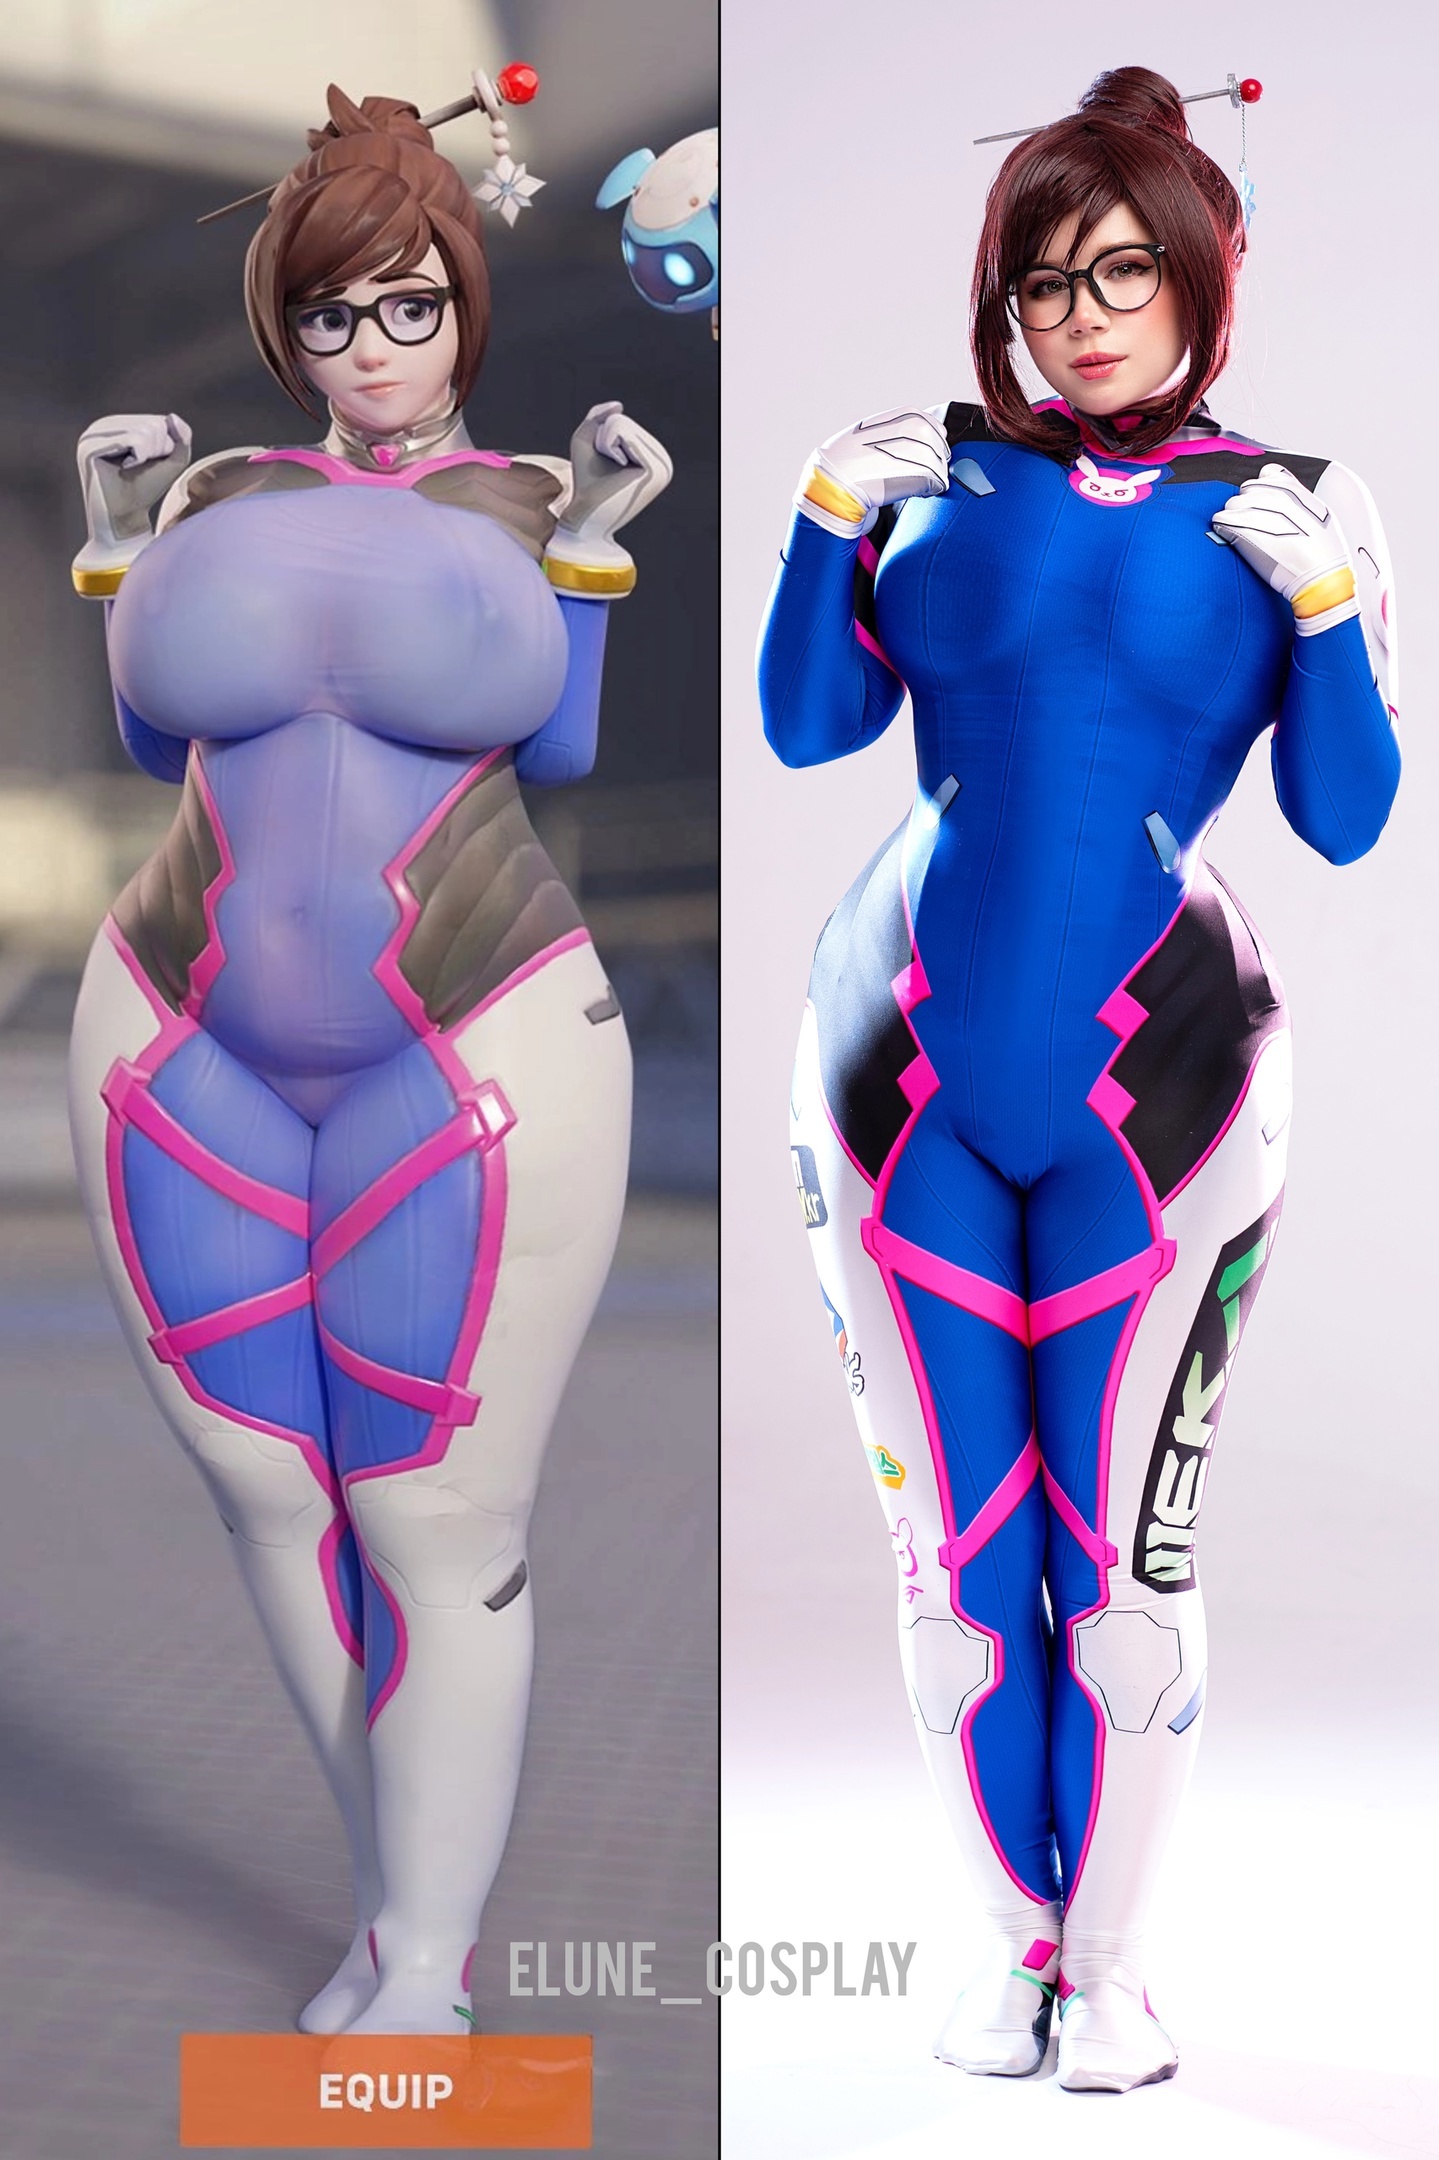 Cuckold by dva mei and pharah overwatch cosplay